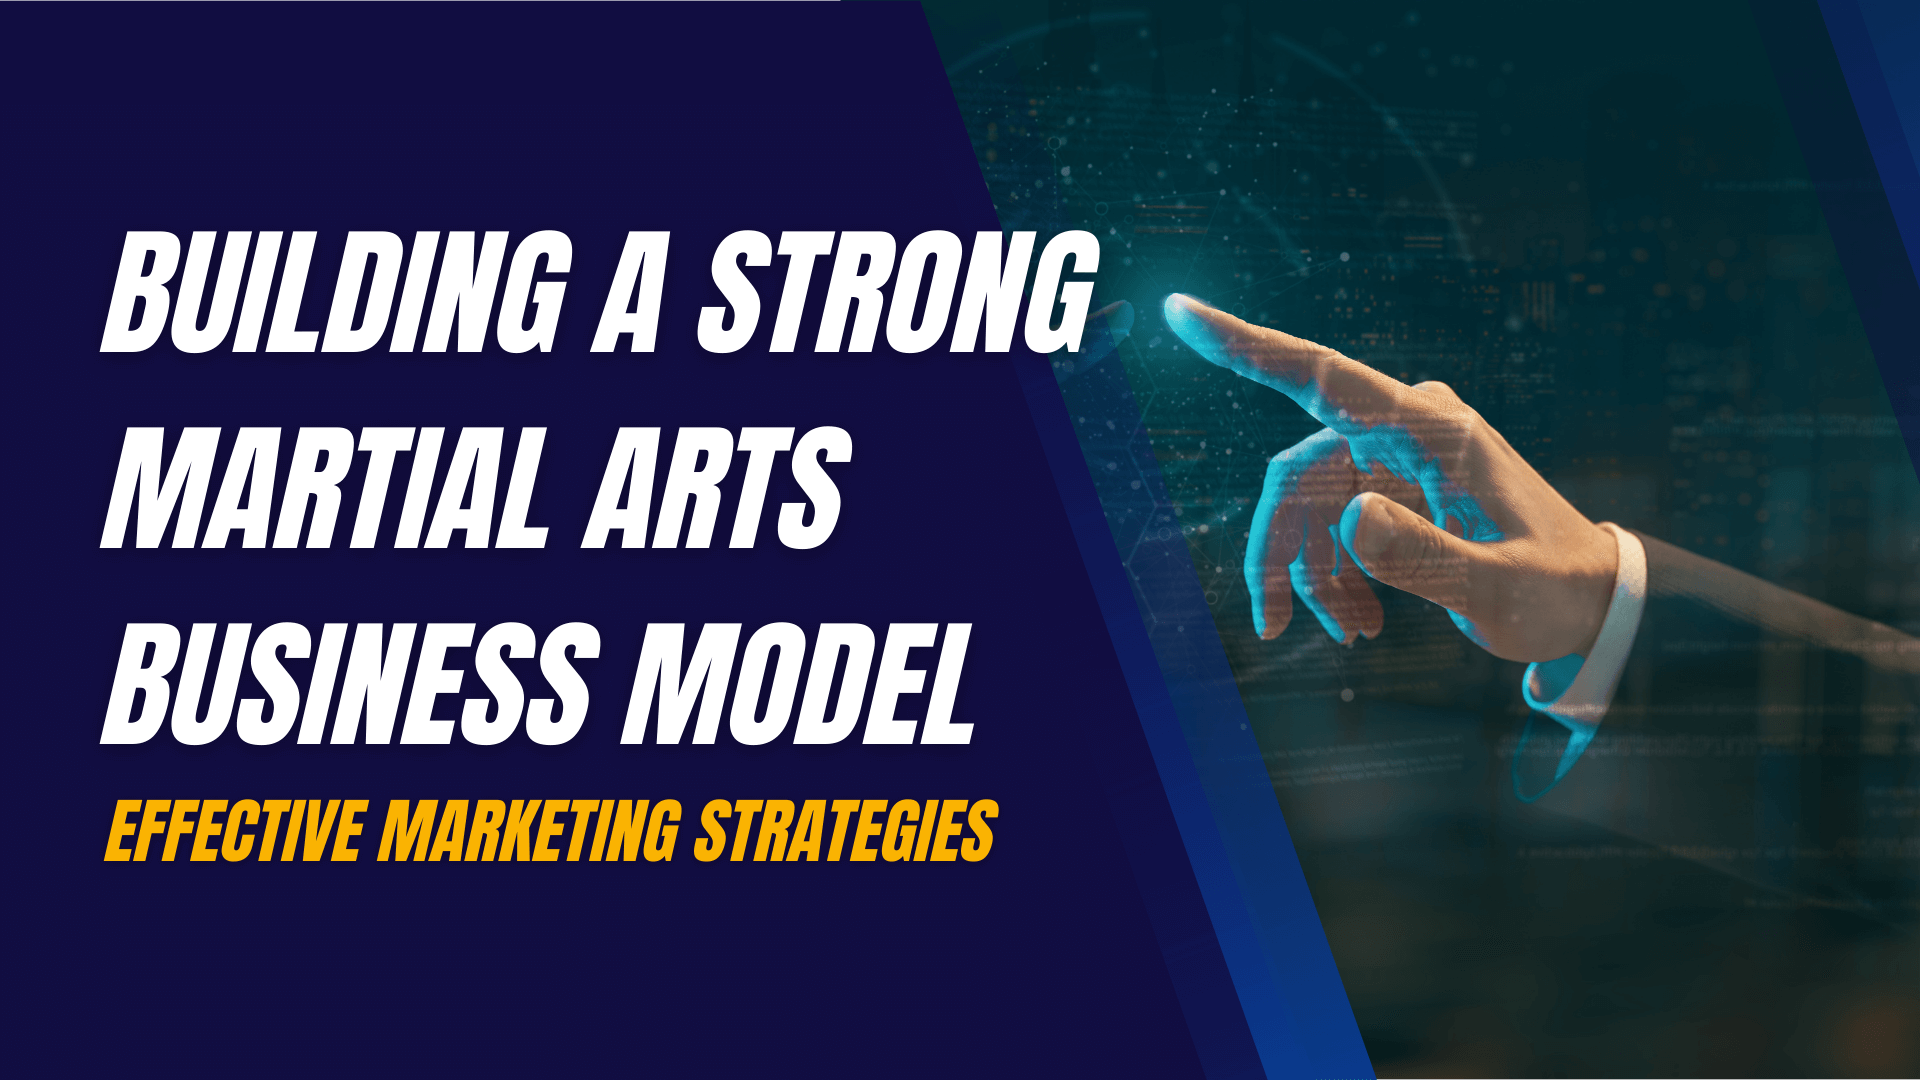 Building a Strong Martial Arts Business Model: Effective Marketing Strategies